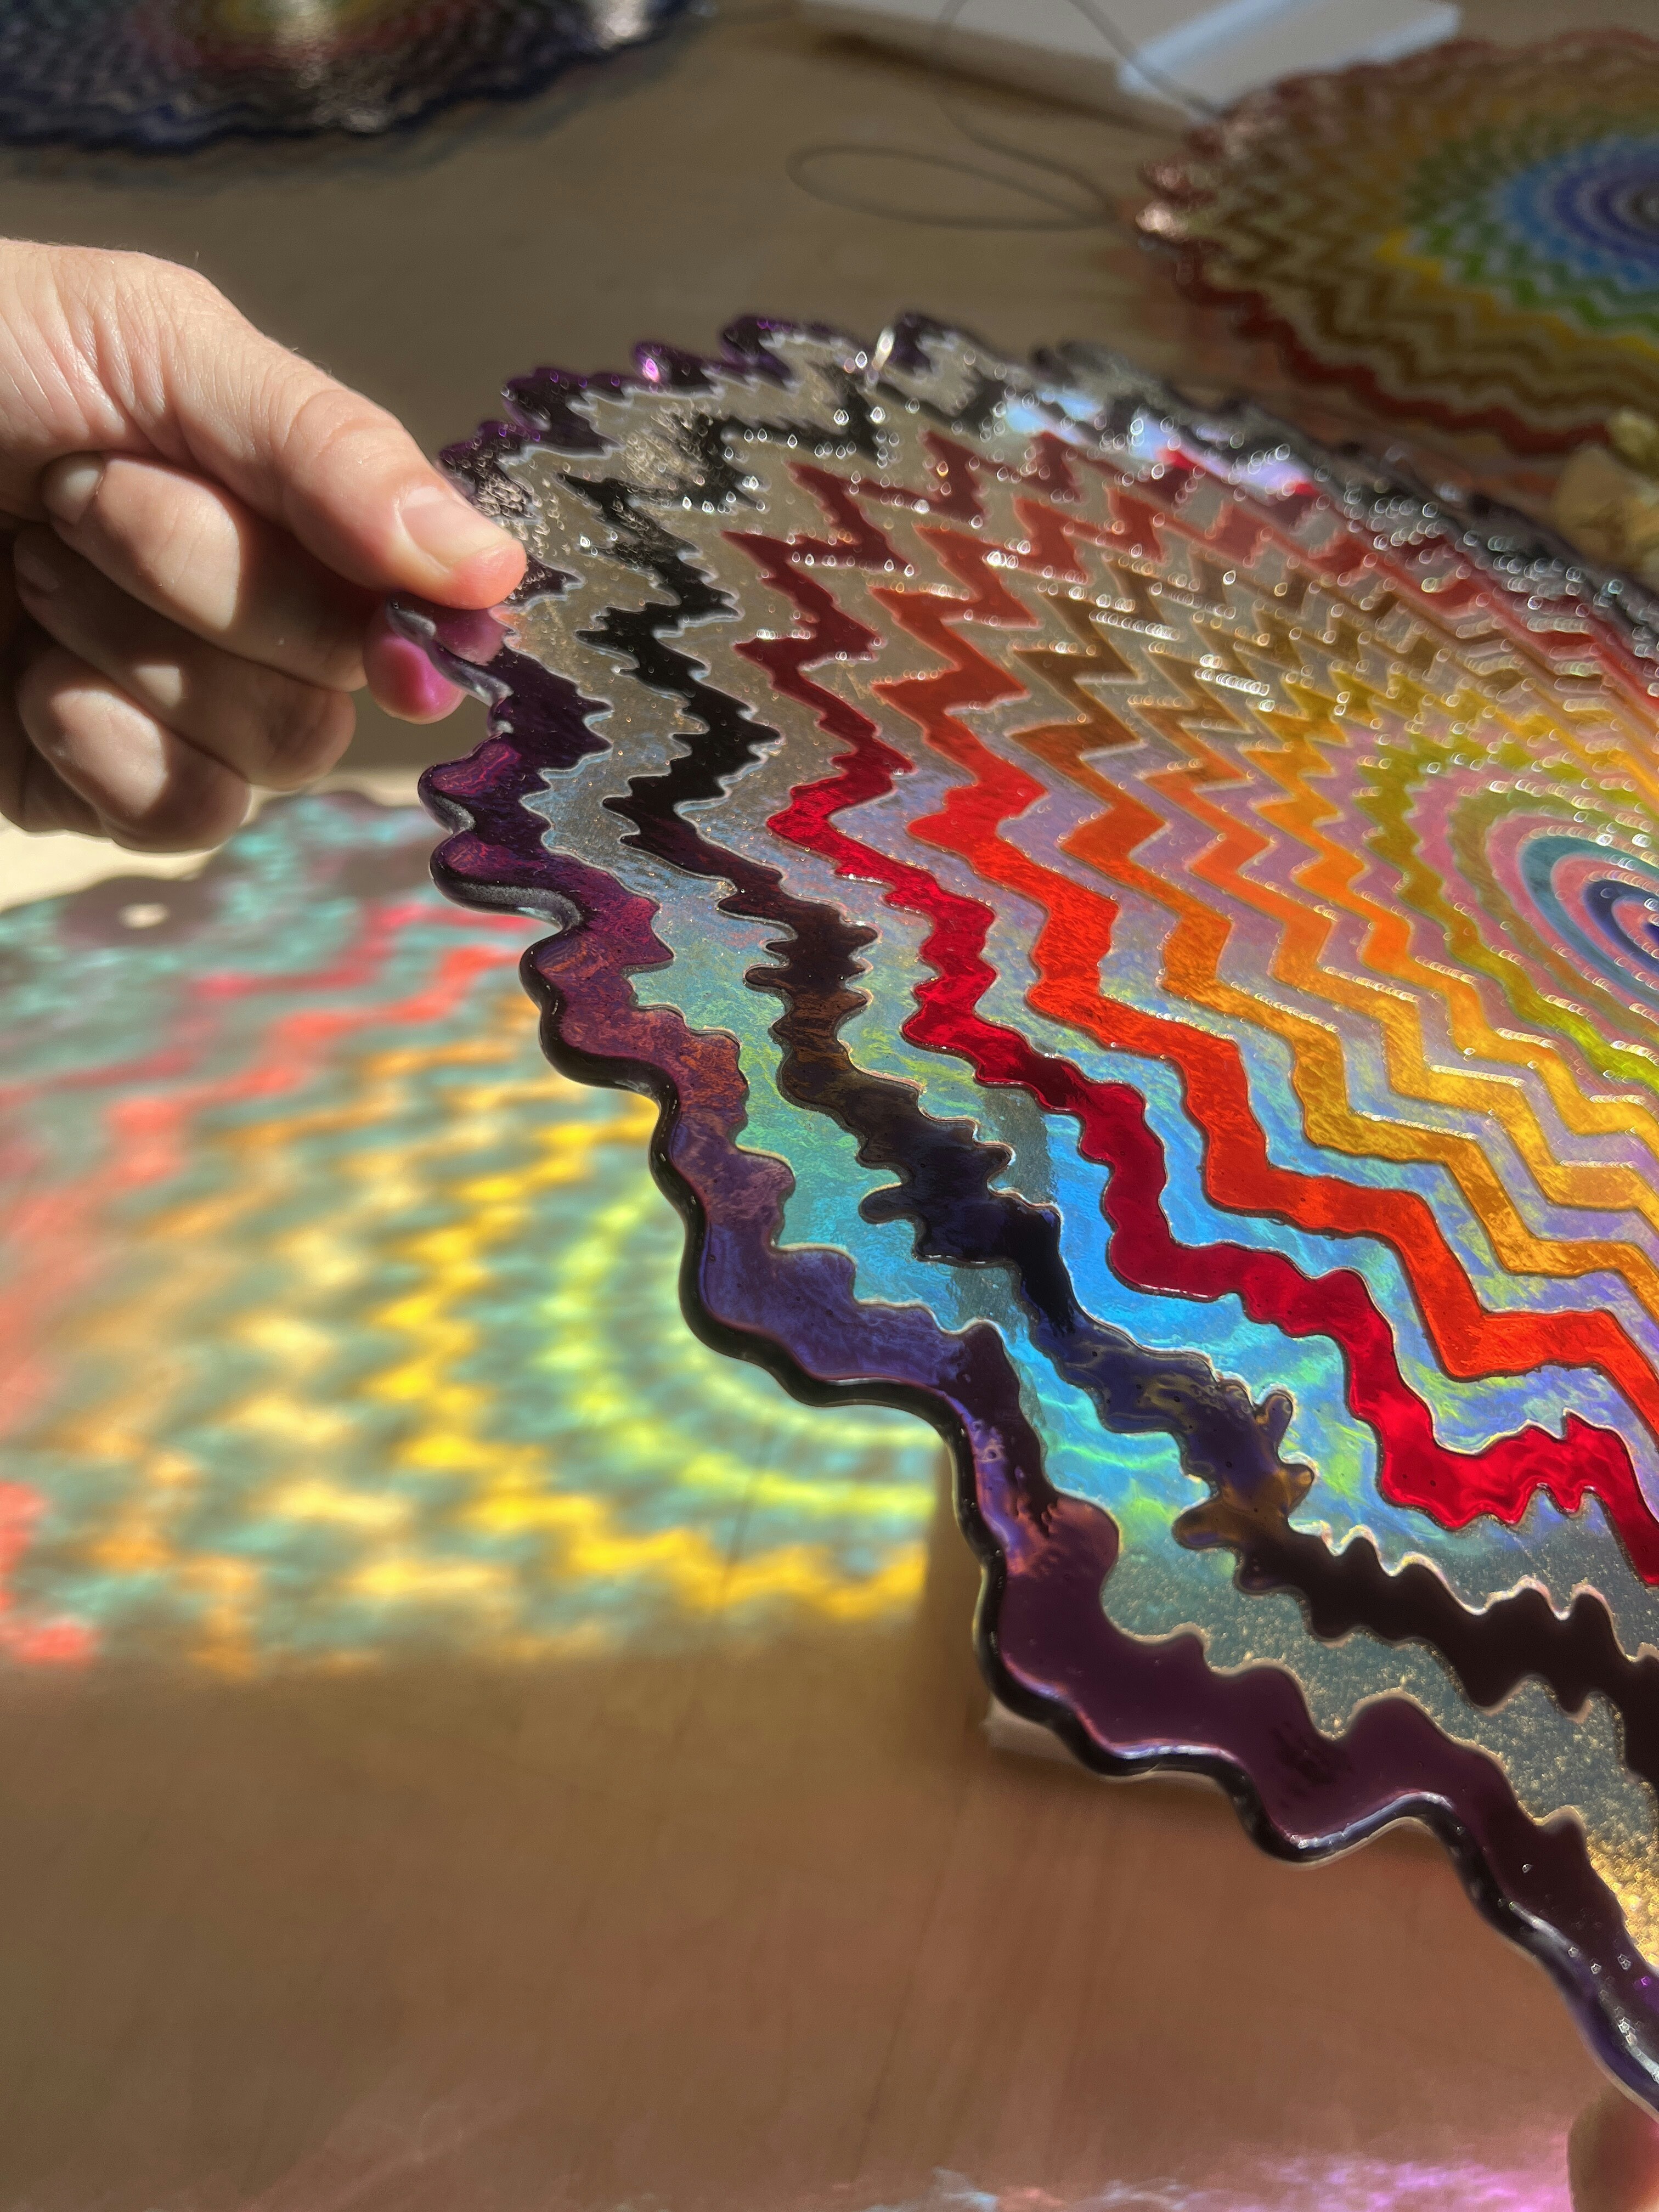 Collective Post - The making of Dichroic Mandala 🌀